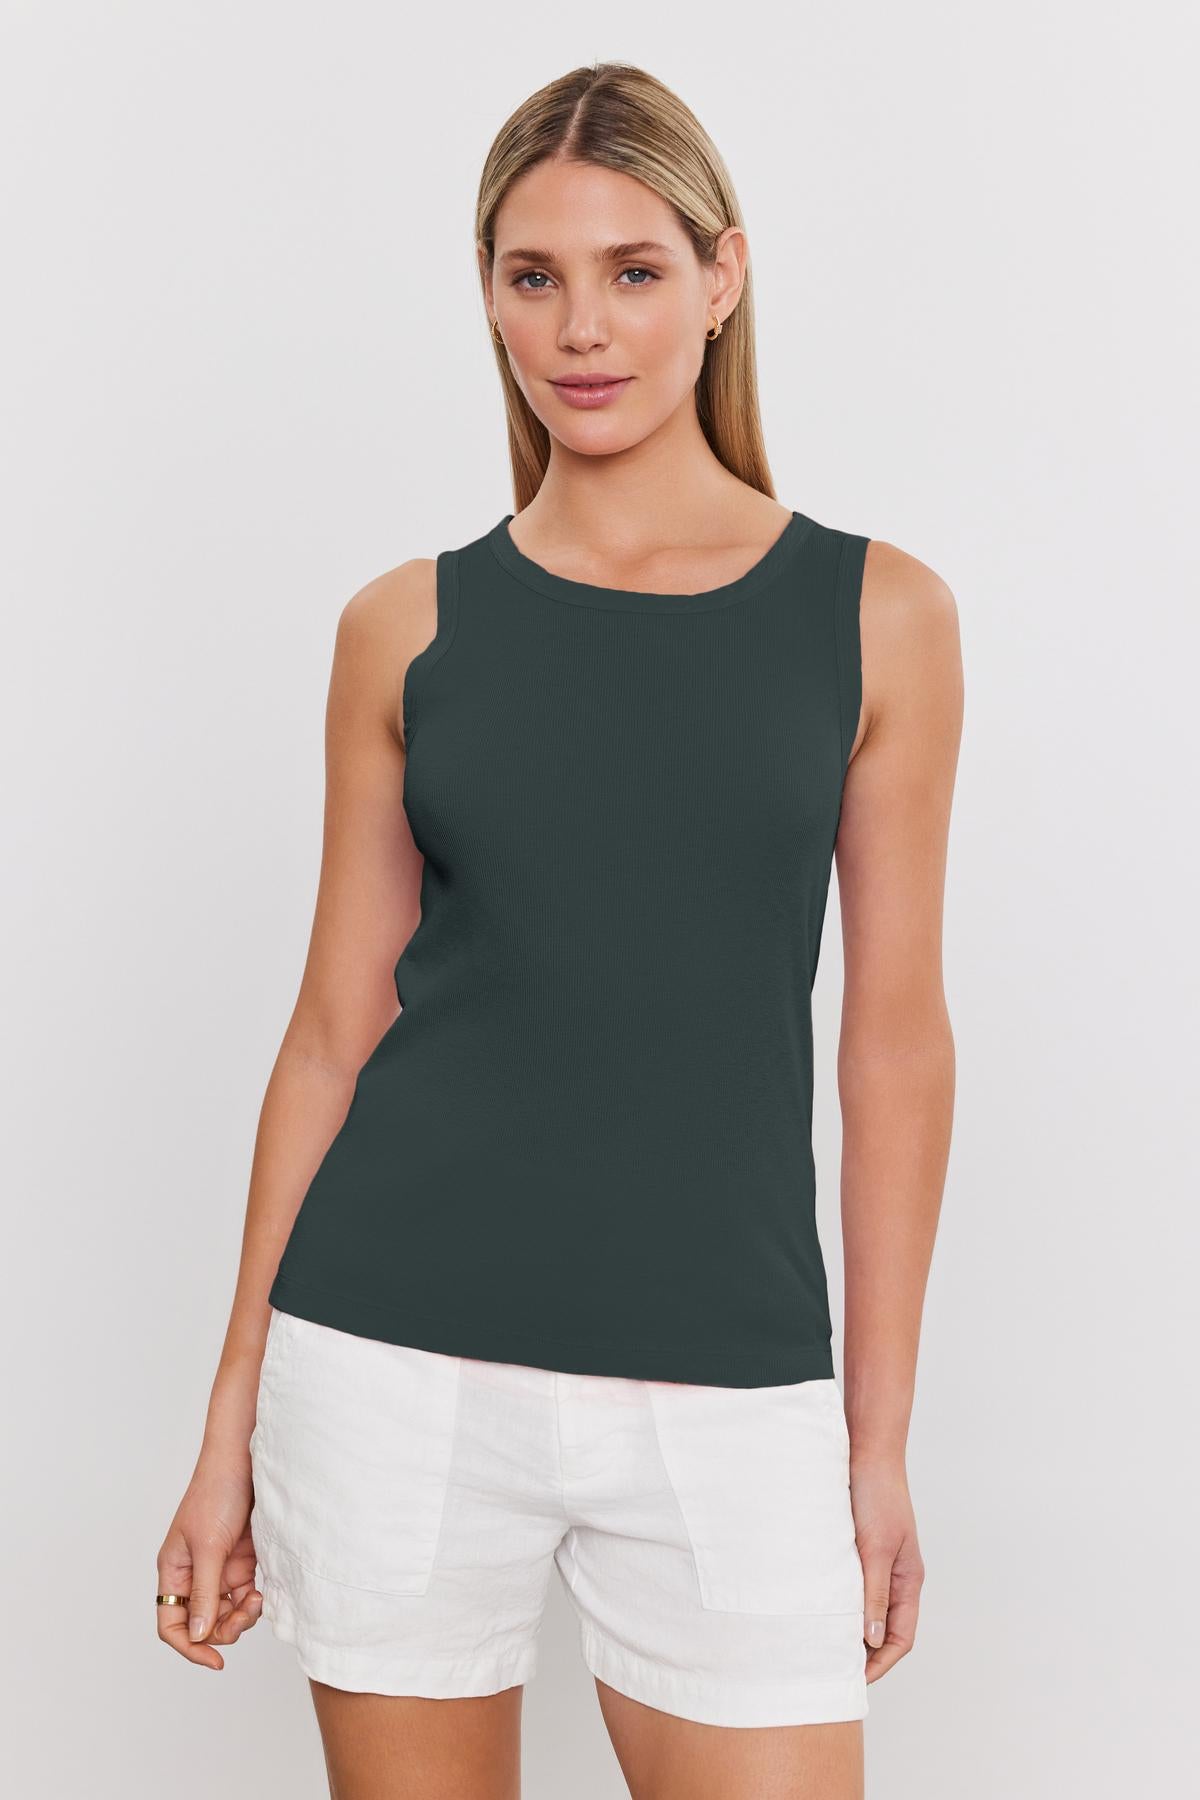 A person with long, blonde hair is wearing a sleeveless dark gray MAXIE RIBBED TANK TOP by Velvet by Graham & Spencer and white shorts, standing against a plain white background.-37241154437313